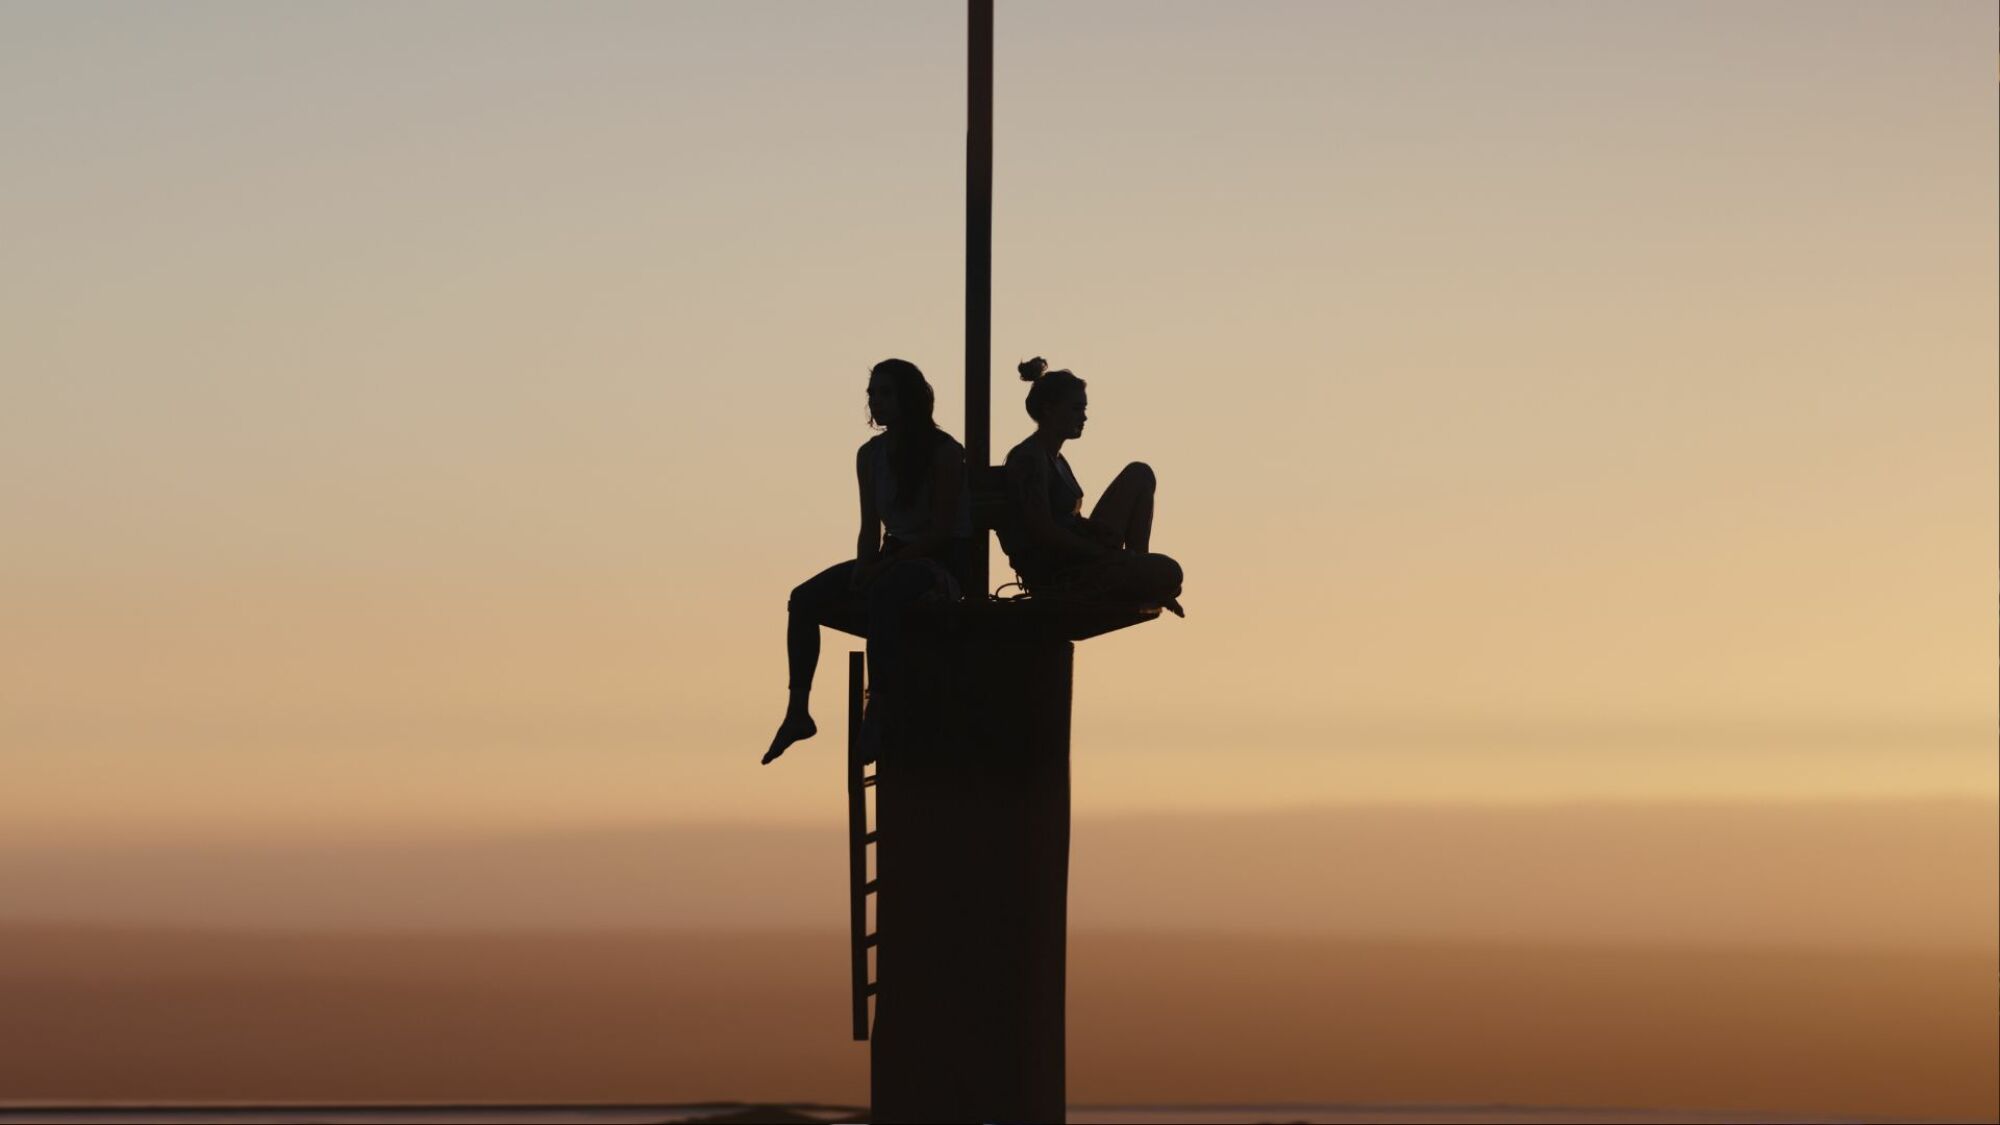 Virginia Gardner and Grace Caroline Currey sit atop a tower in "Fall."